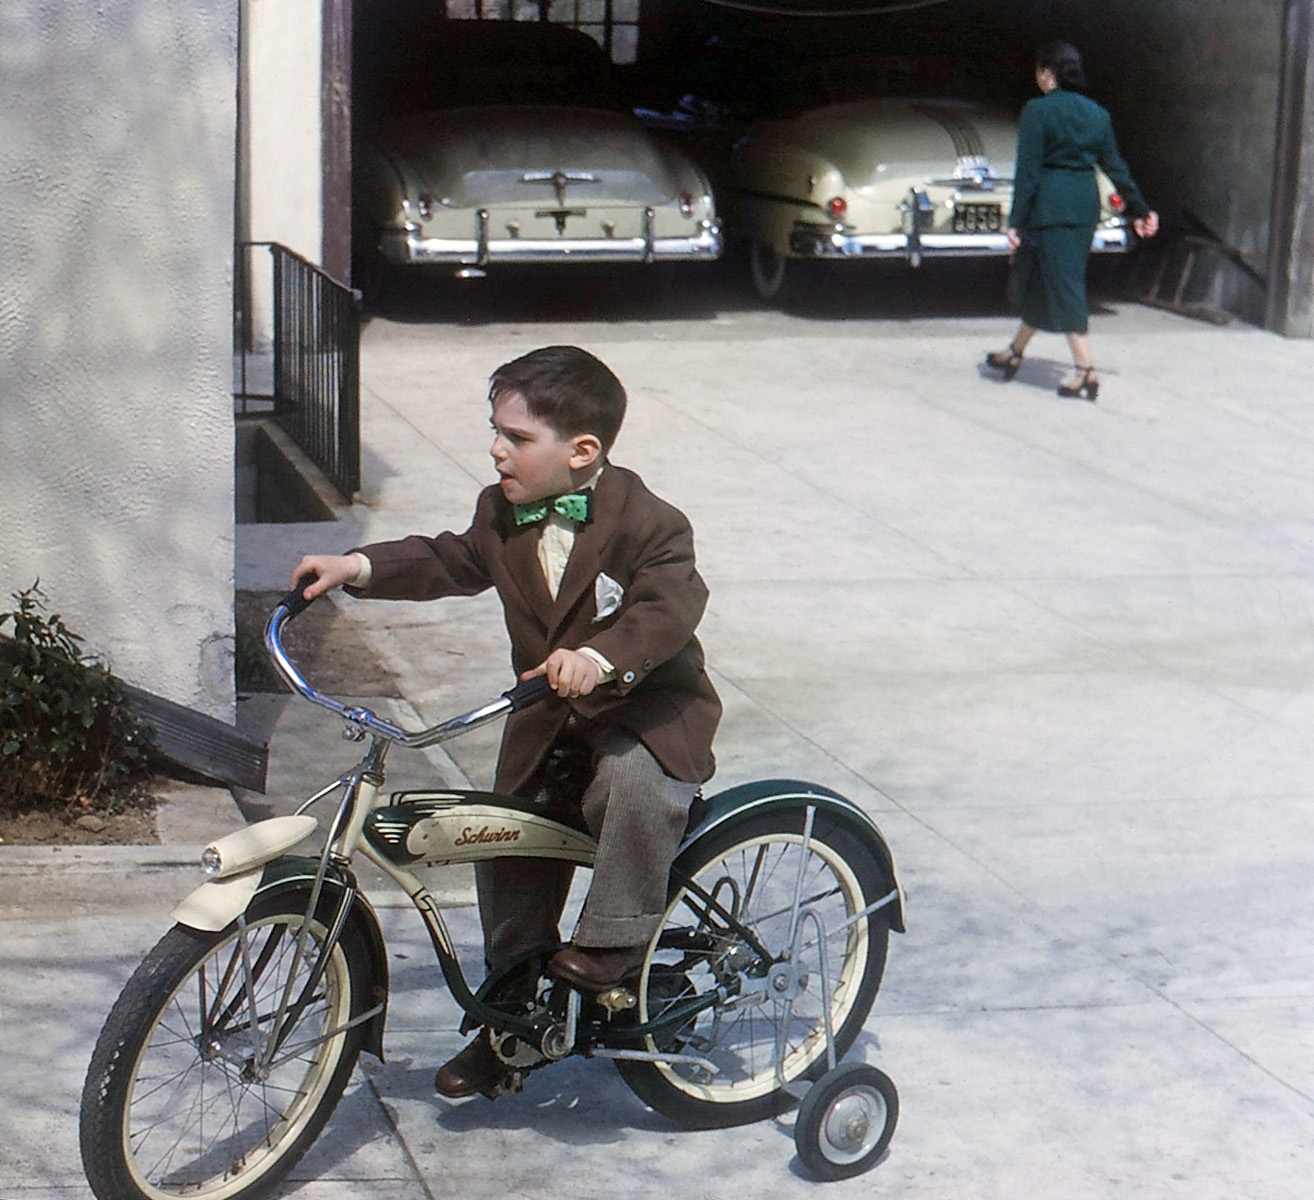 A Schwinn bike and its garage-mates circa 1949, from a set of 35mm Kodachromes I acquired in northern New Jersey. View full size.